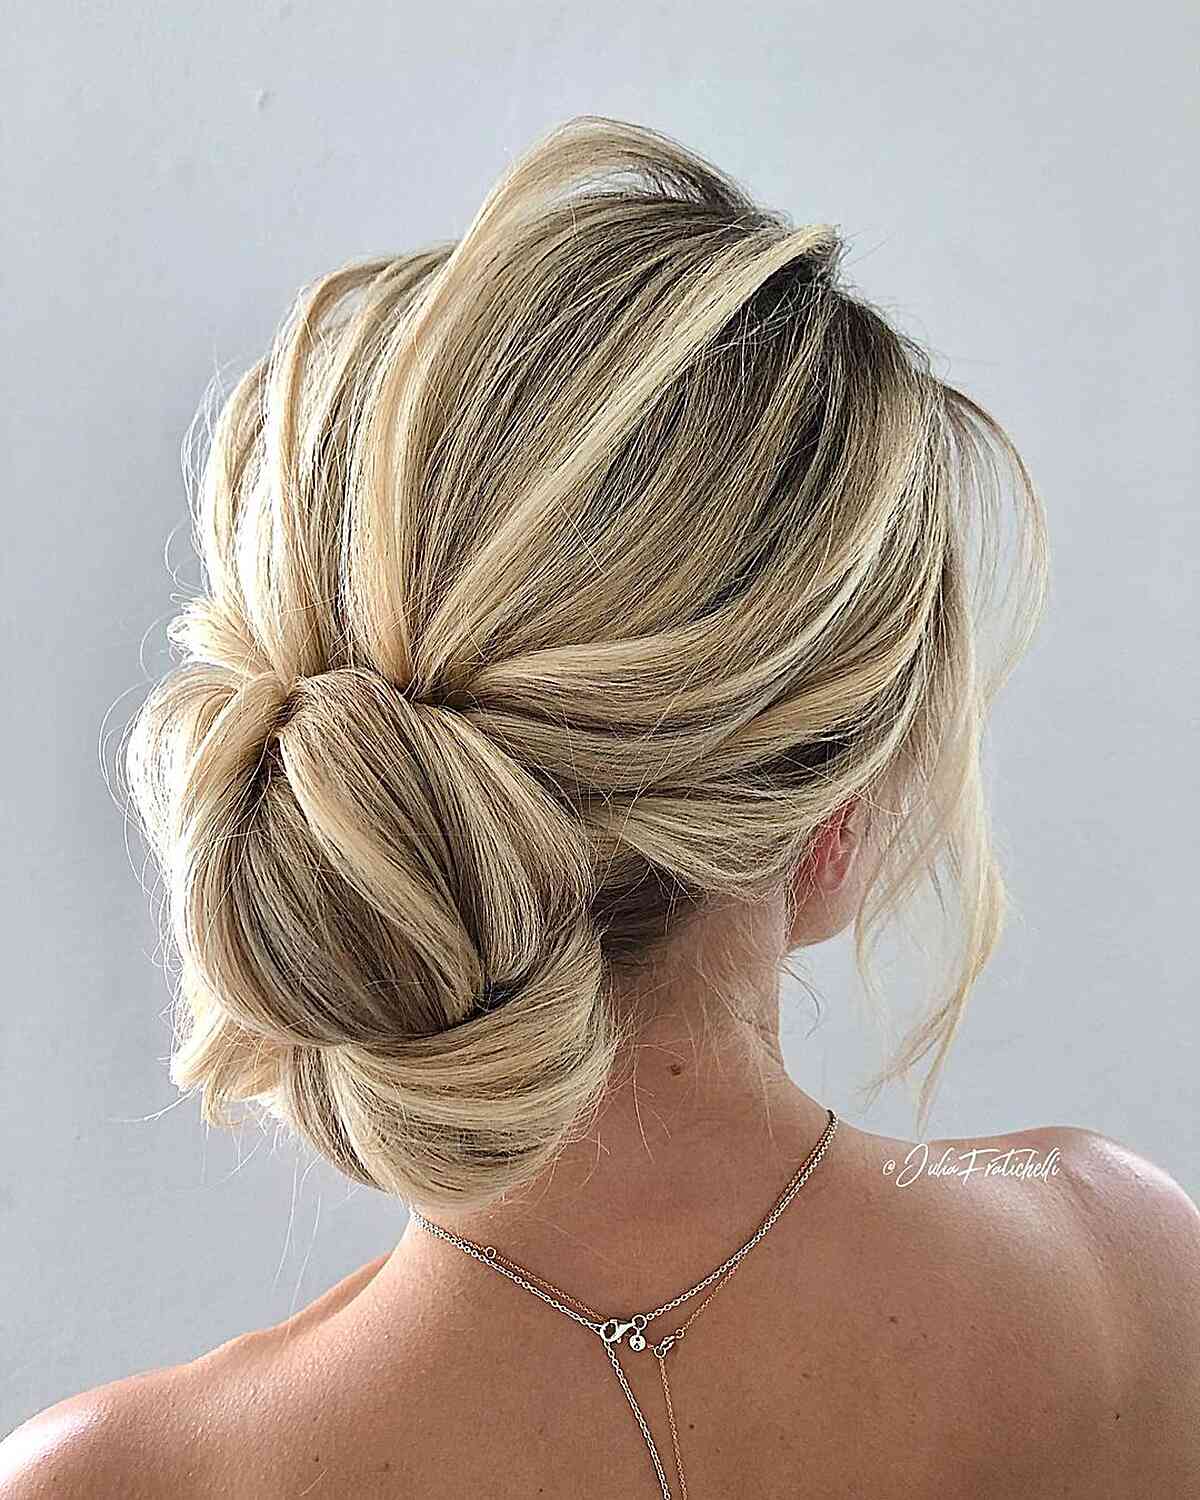 Romantic & Tousled Updo Hairstyle for Long Hair